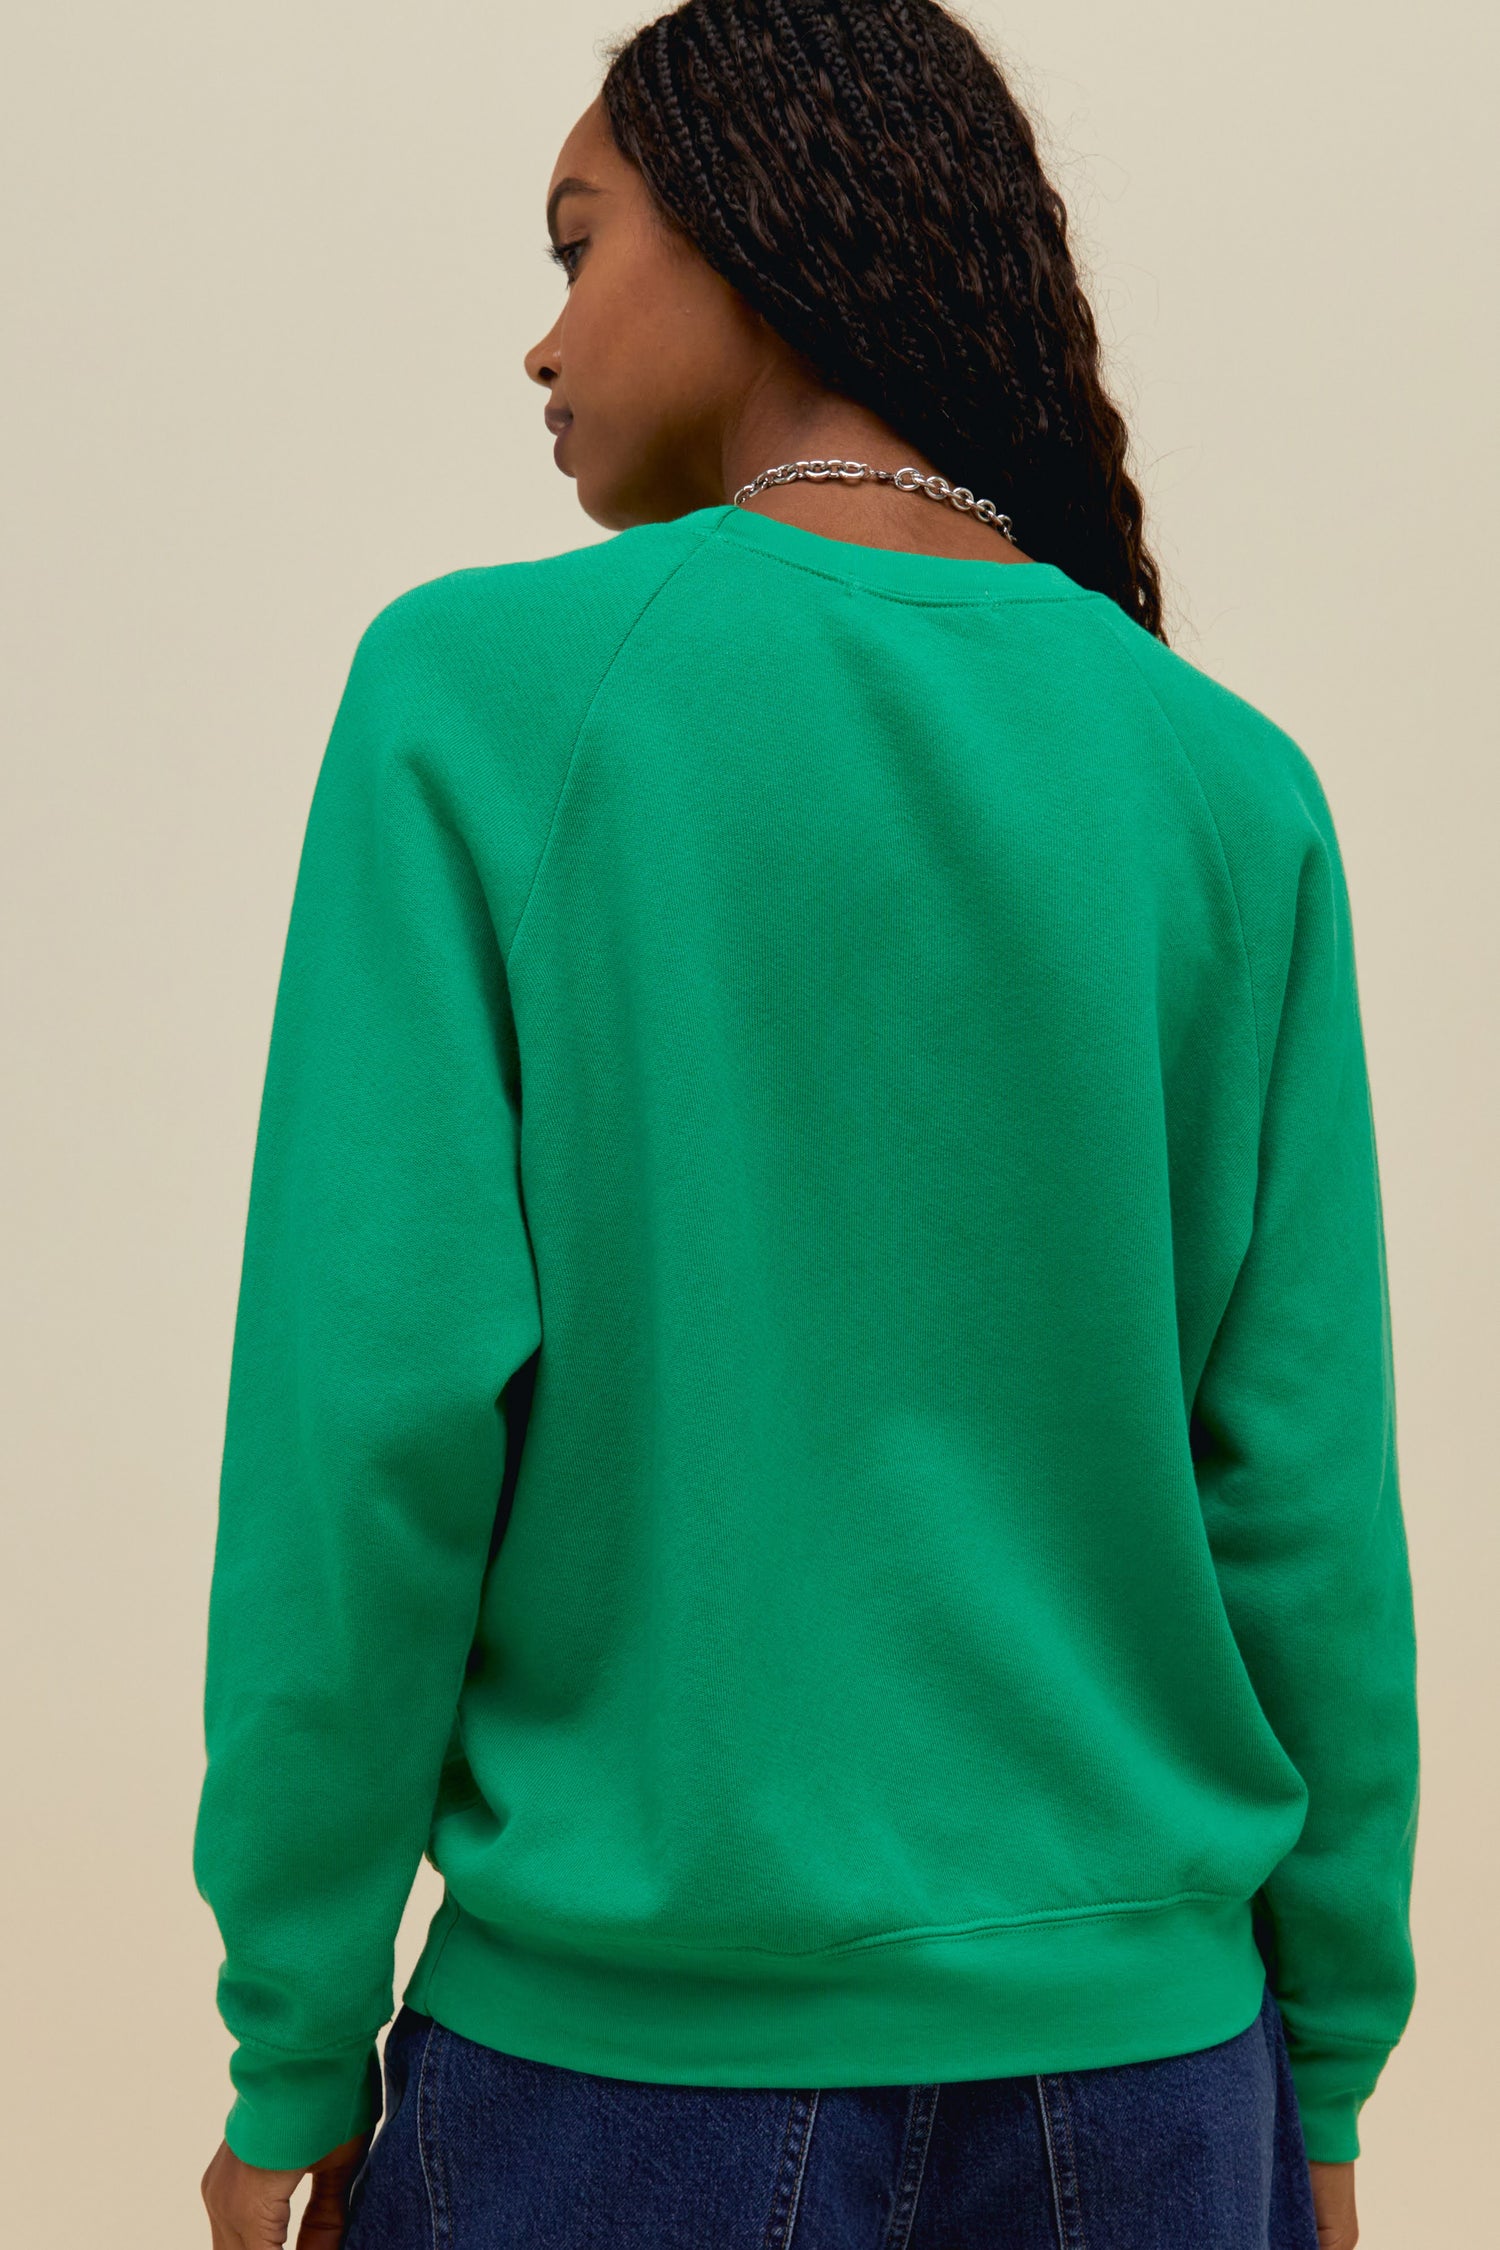 A model featuring a green long sleeve merch, stamped with "Asbury Park".